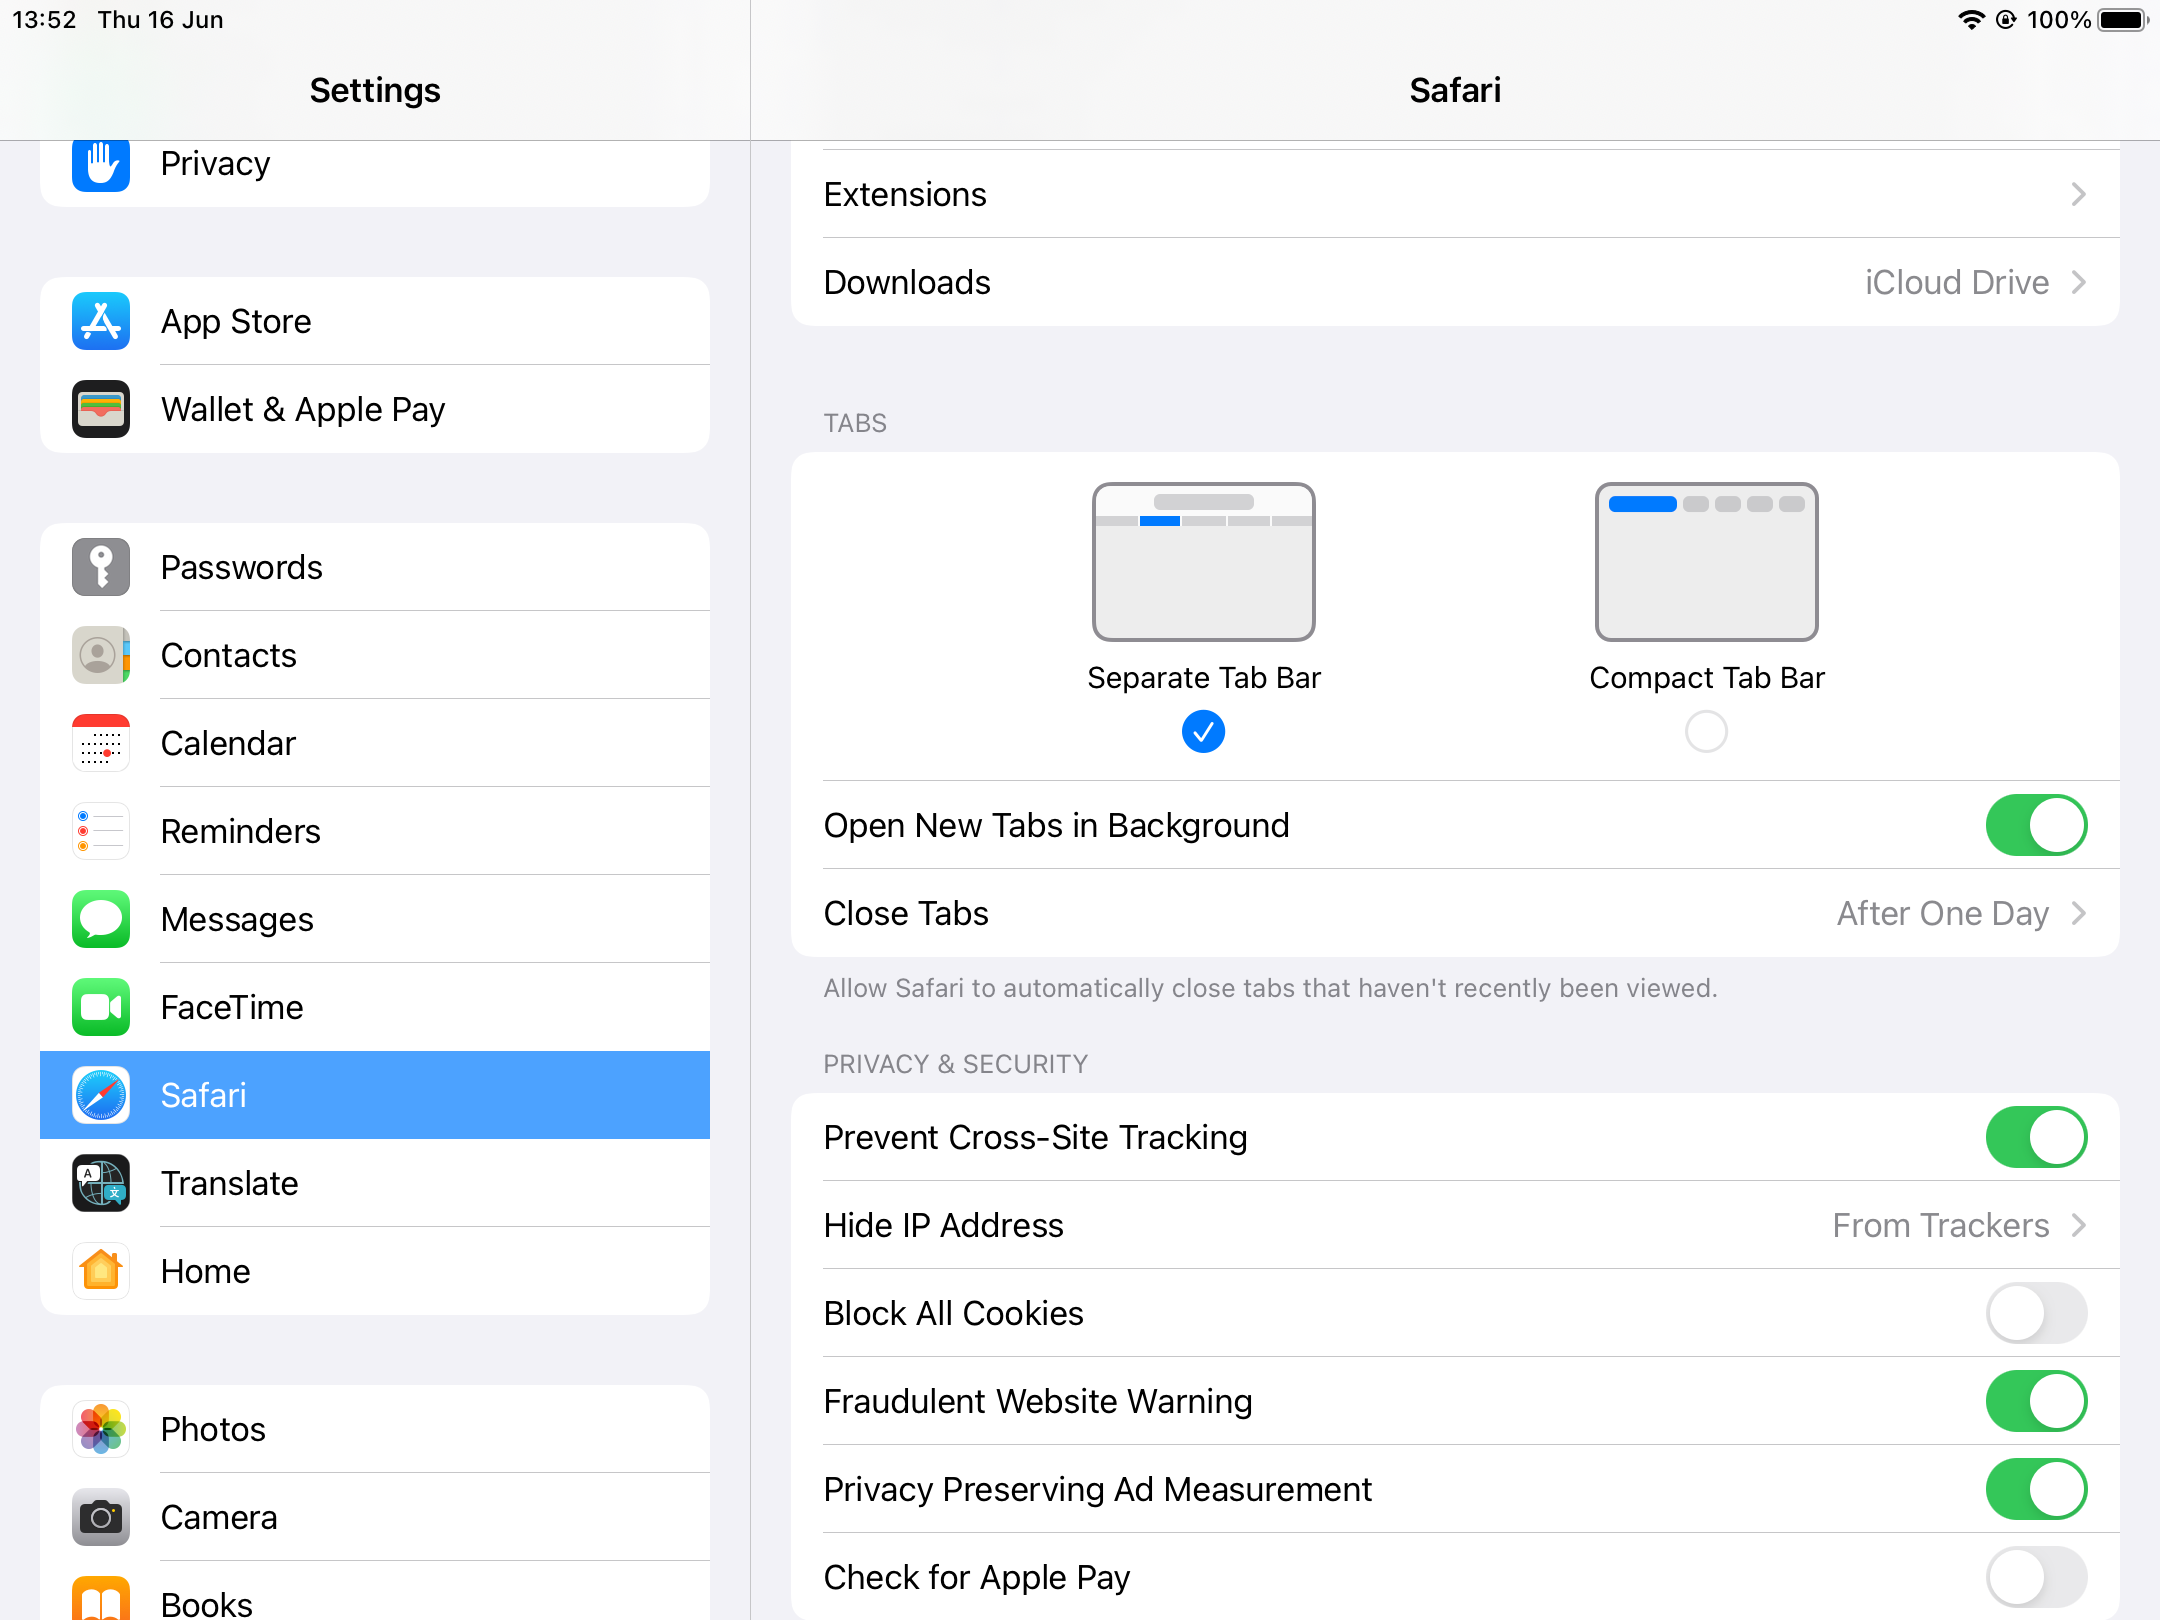 On your iPhone or iPad, use these setting